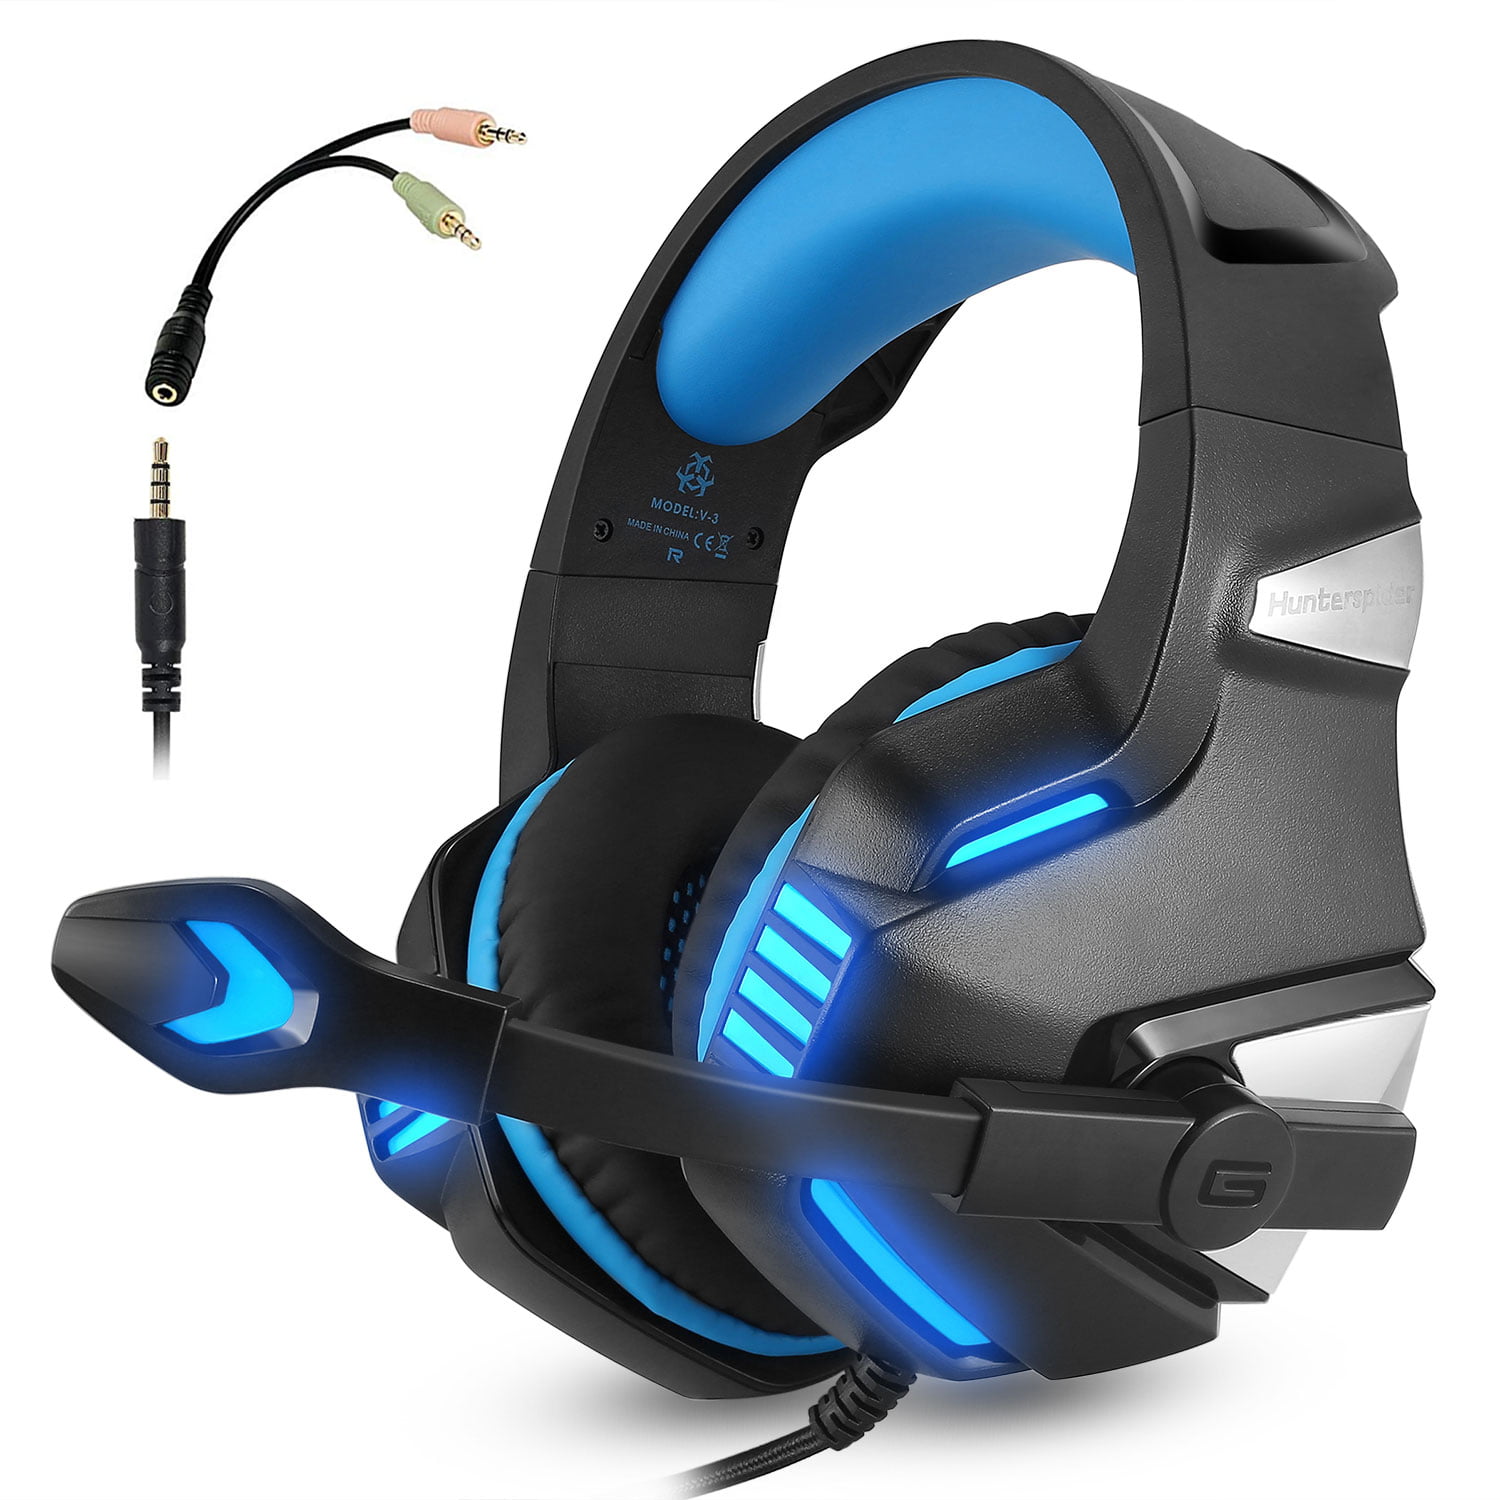 Newest 2019 Upgraded Gaming Headset Best For Xbox One Ps4 Pc